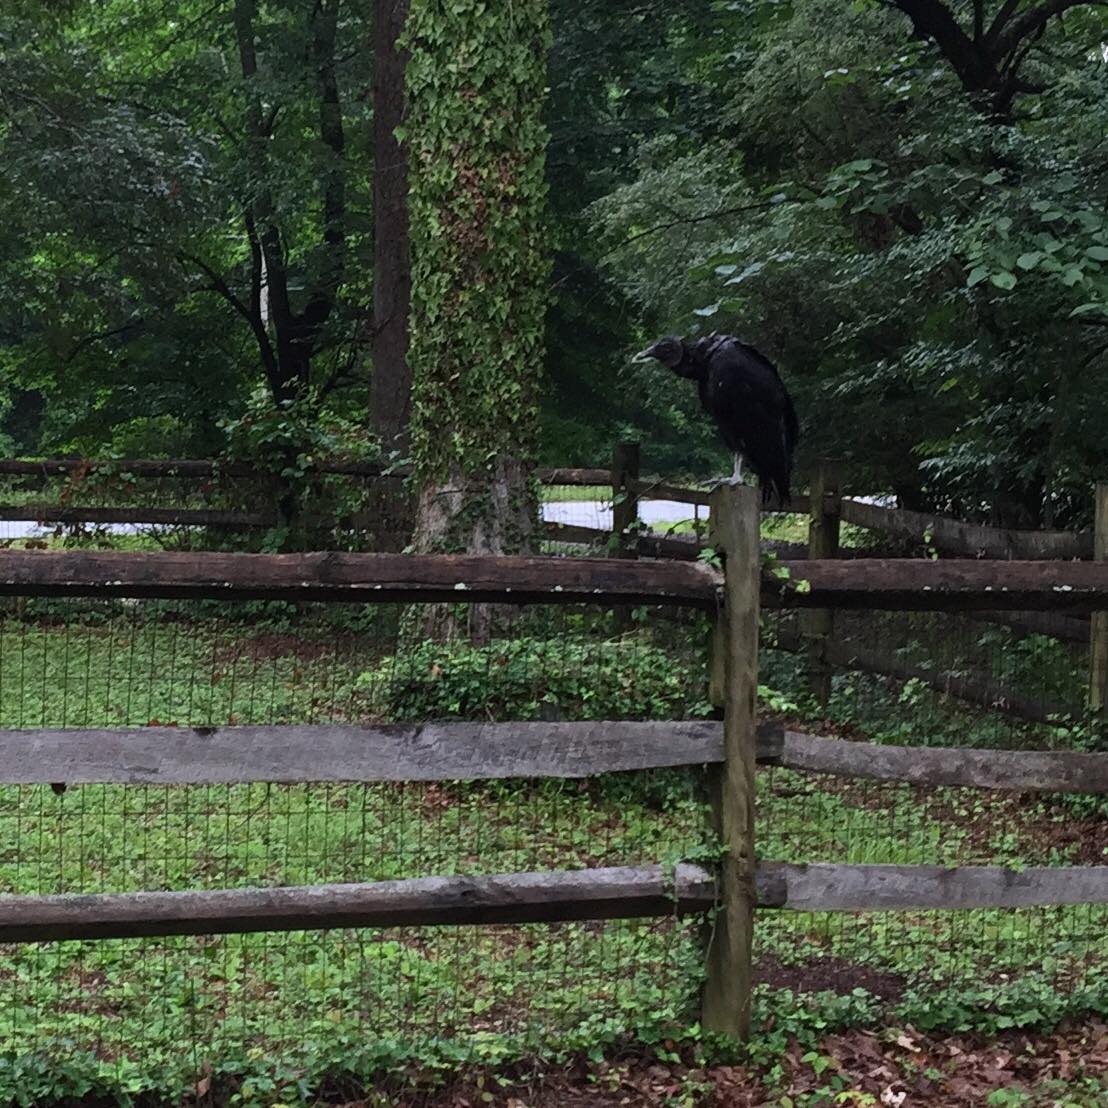 Vulture sitting on a fence post